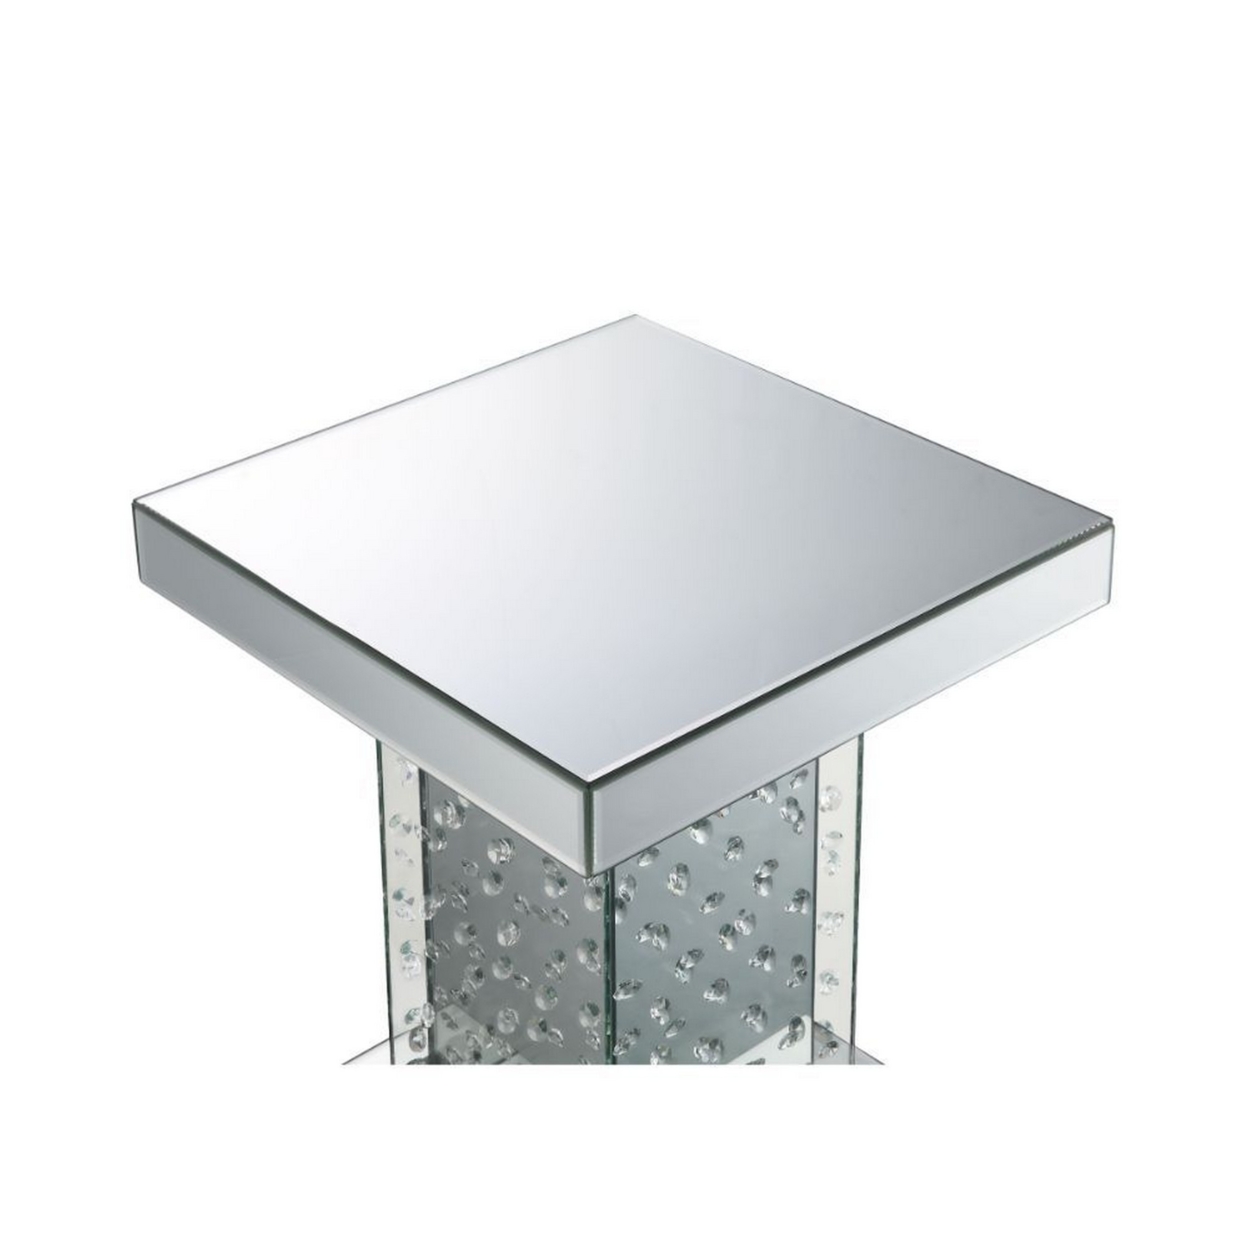 Pali 20 Inch Square Pedestal End Table, Mirrored, Faux Crystal Inlay, Silver- Saltoro Sherpi